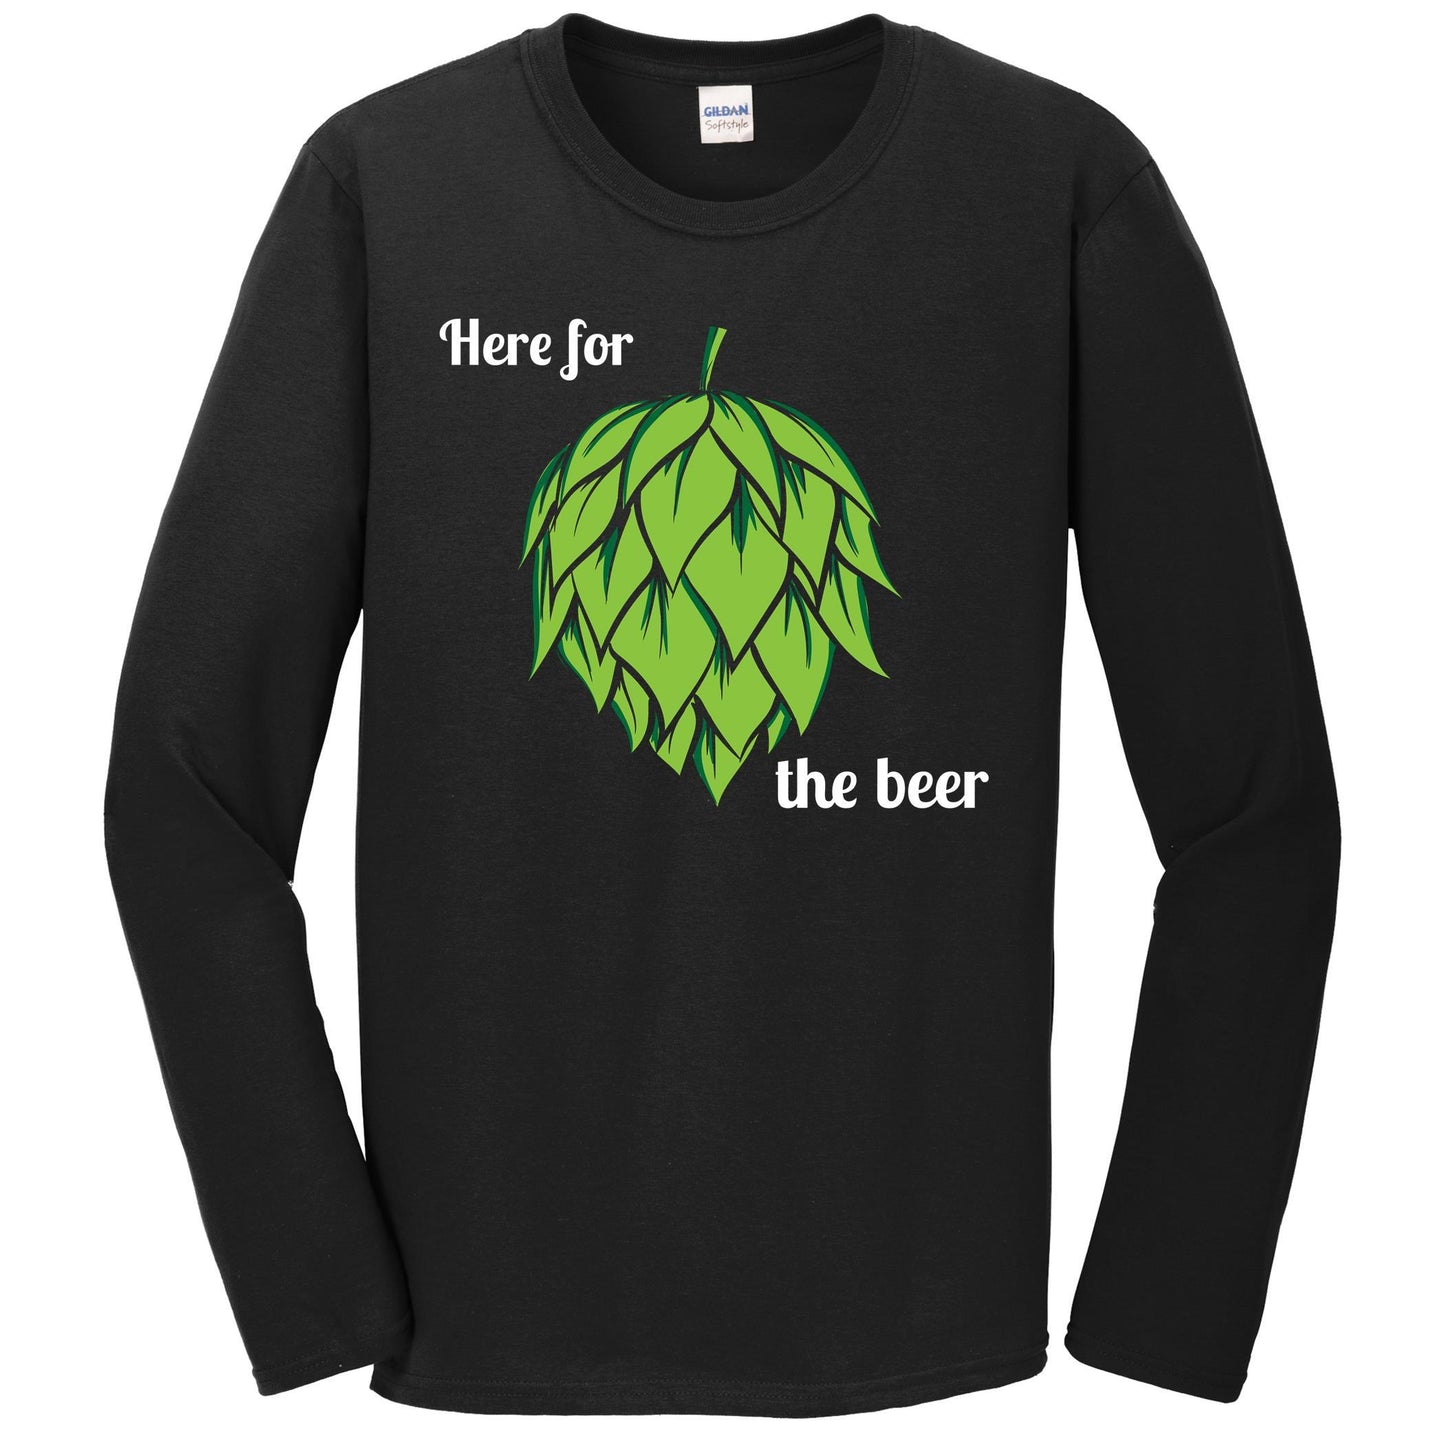 Buy I Wonder If Beer Thinks About Me Too,Long Sleeve Shirt Funny Brewing  Drinking Round Neck Shirt for Men T-Shirt